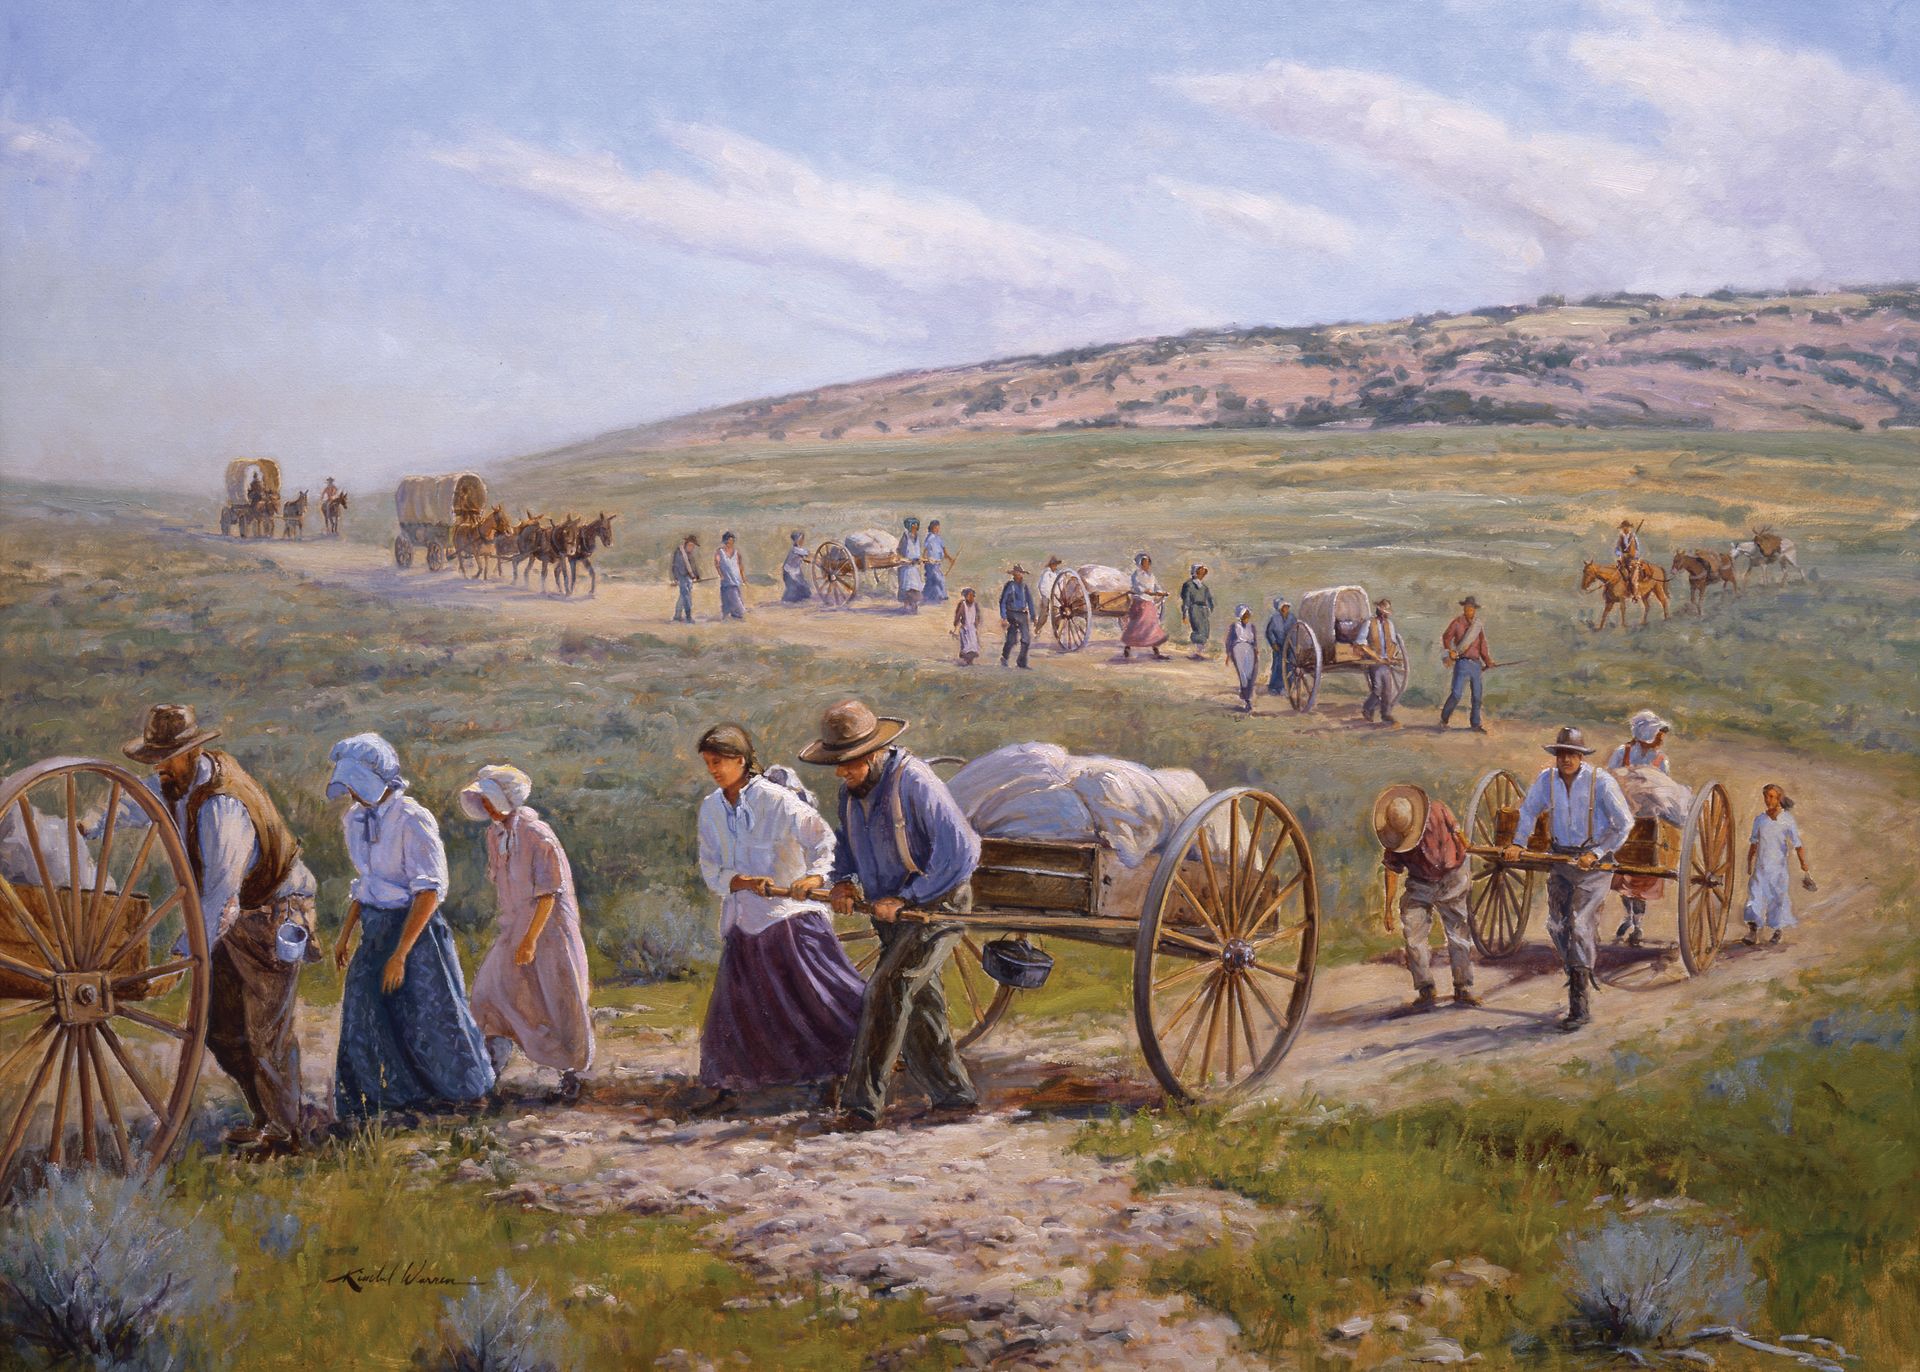 Pushing, Pulling and Praying, Bound for Zion, by E. Kimball Warren